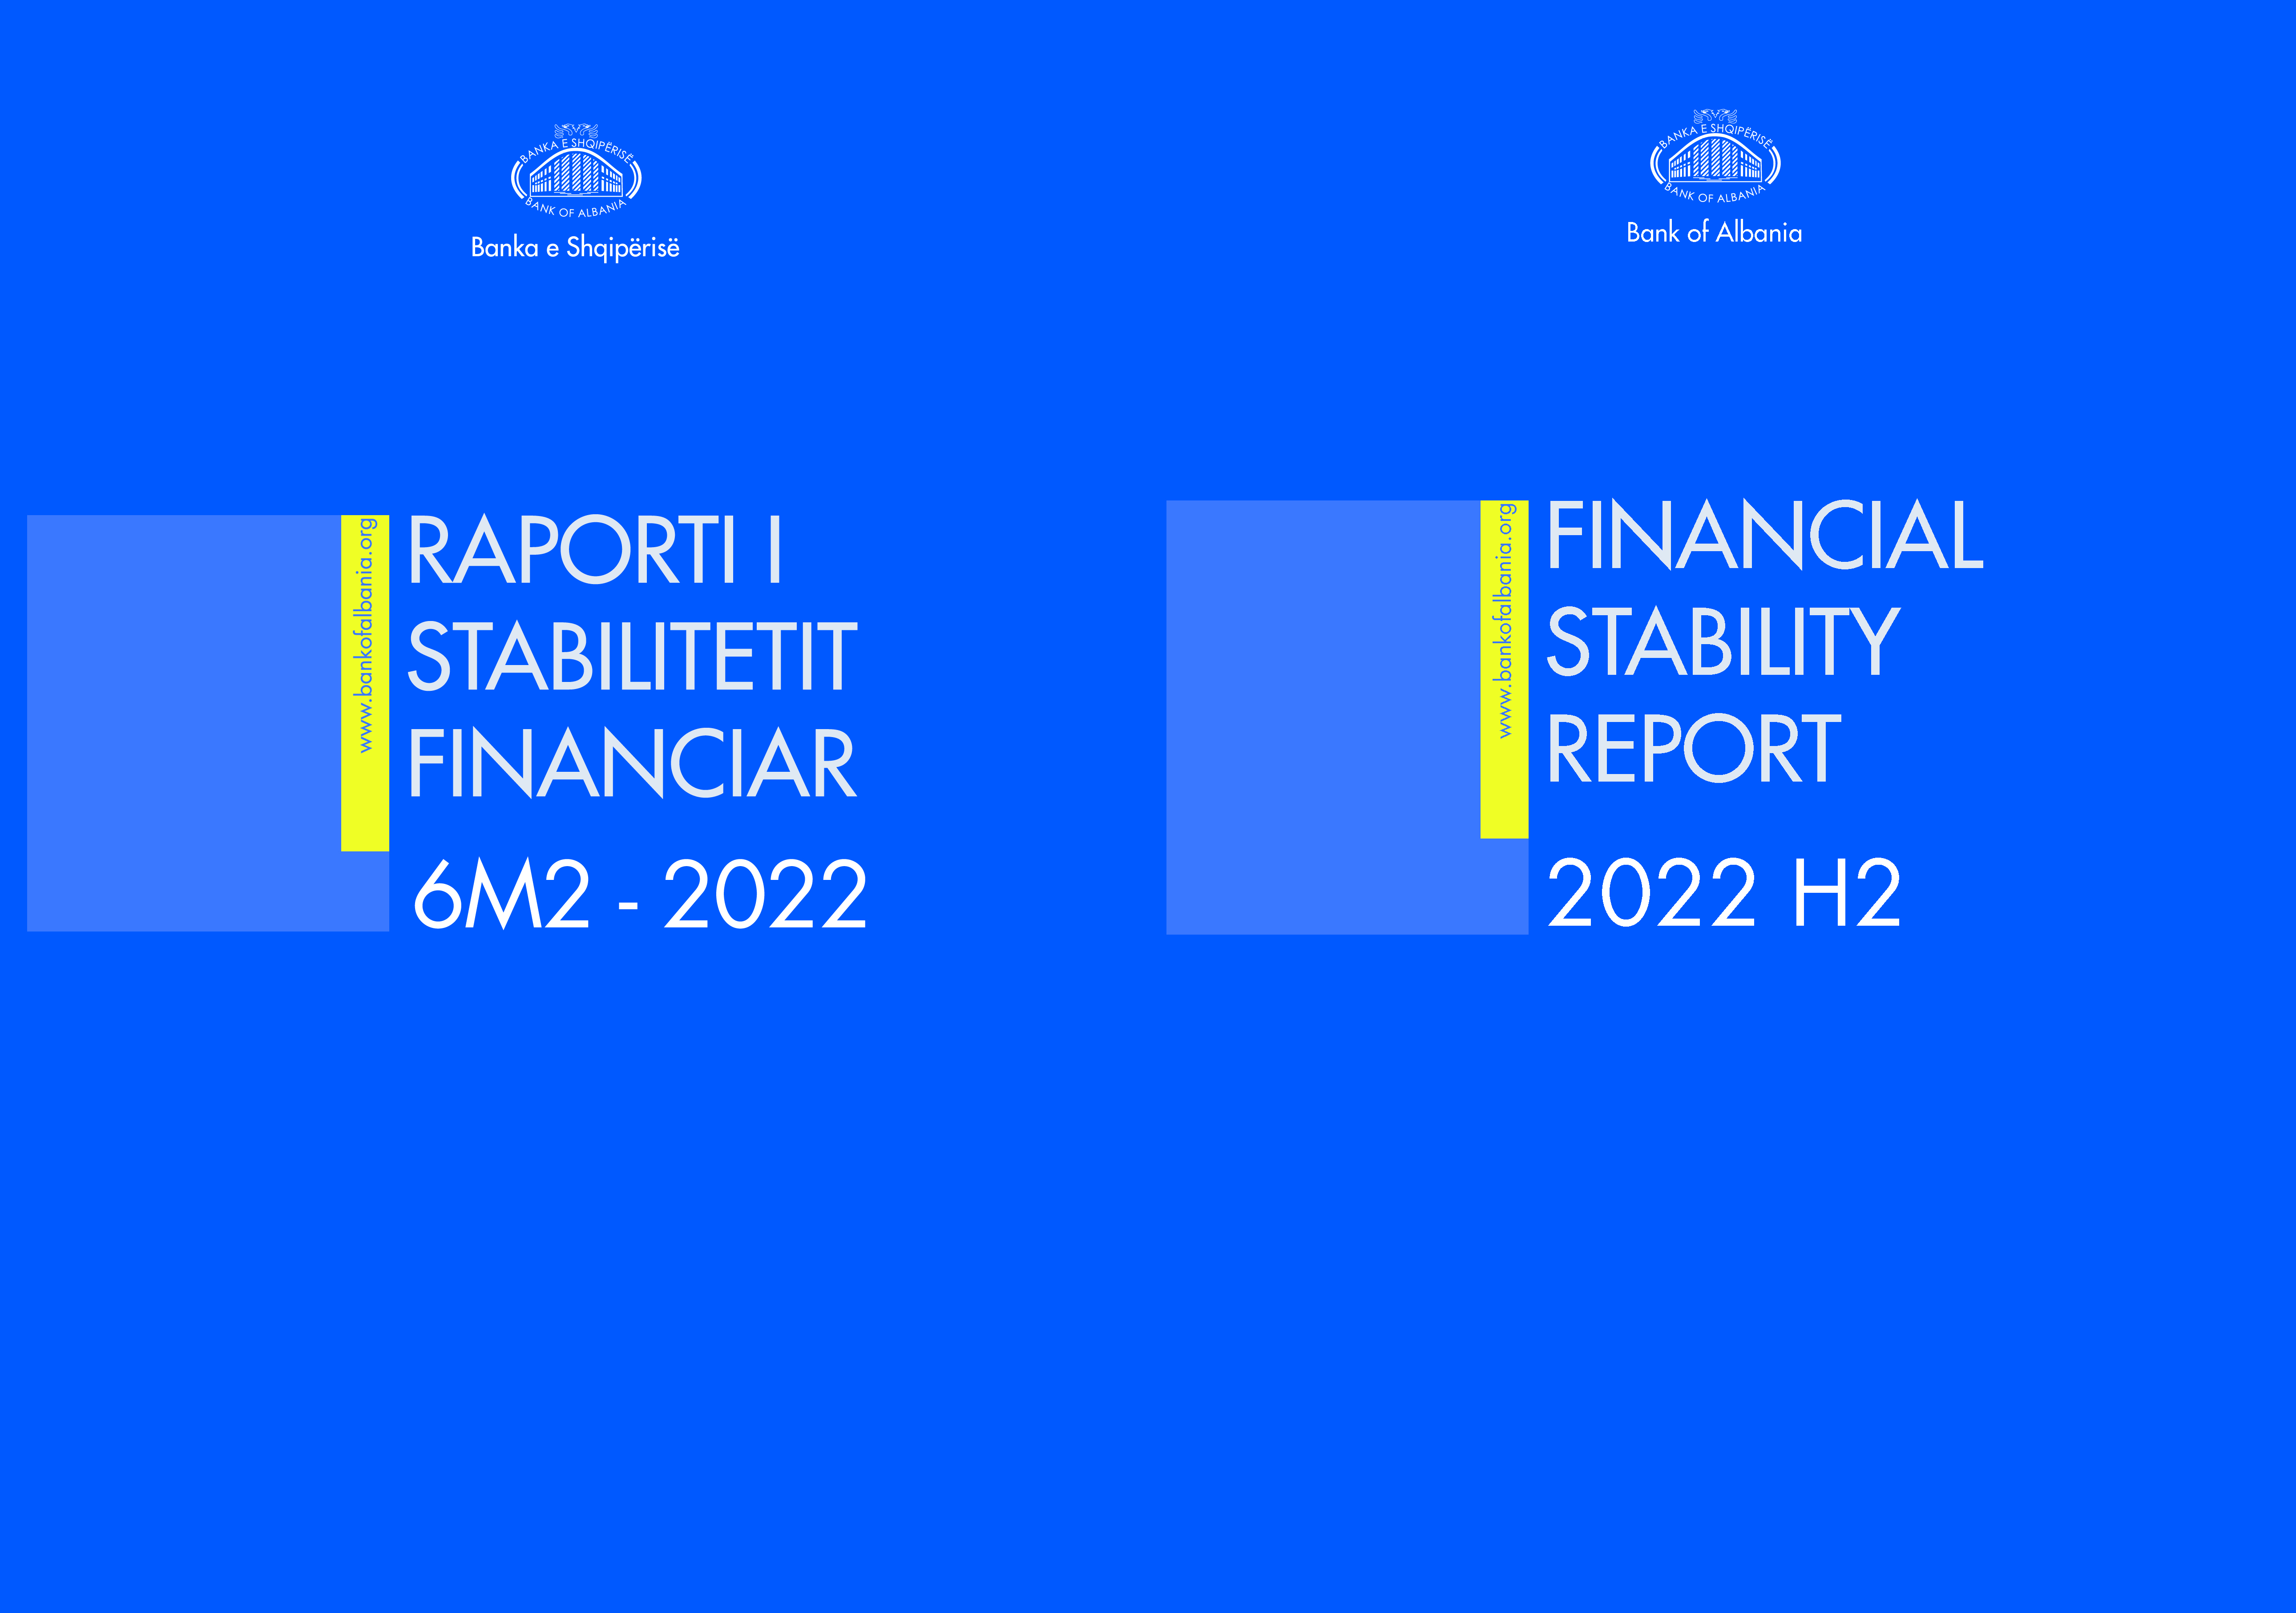 Financial Stability Report - 2022 H2